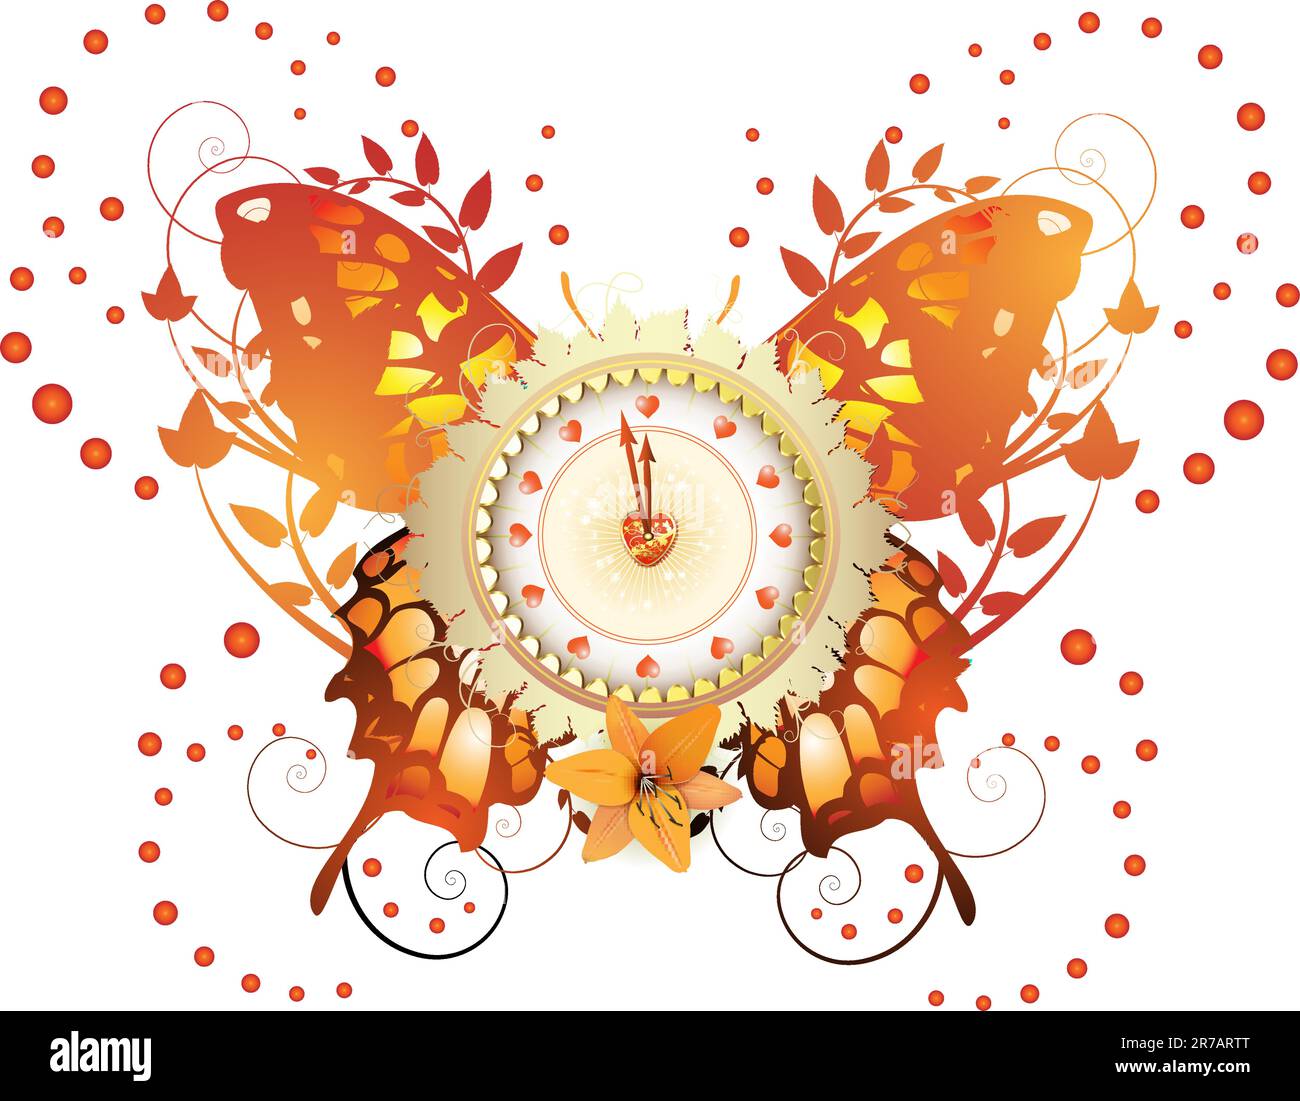 Clock design with Valentine's day theme over colored butterfly Stock Vector